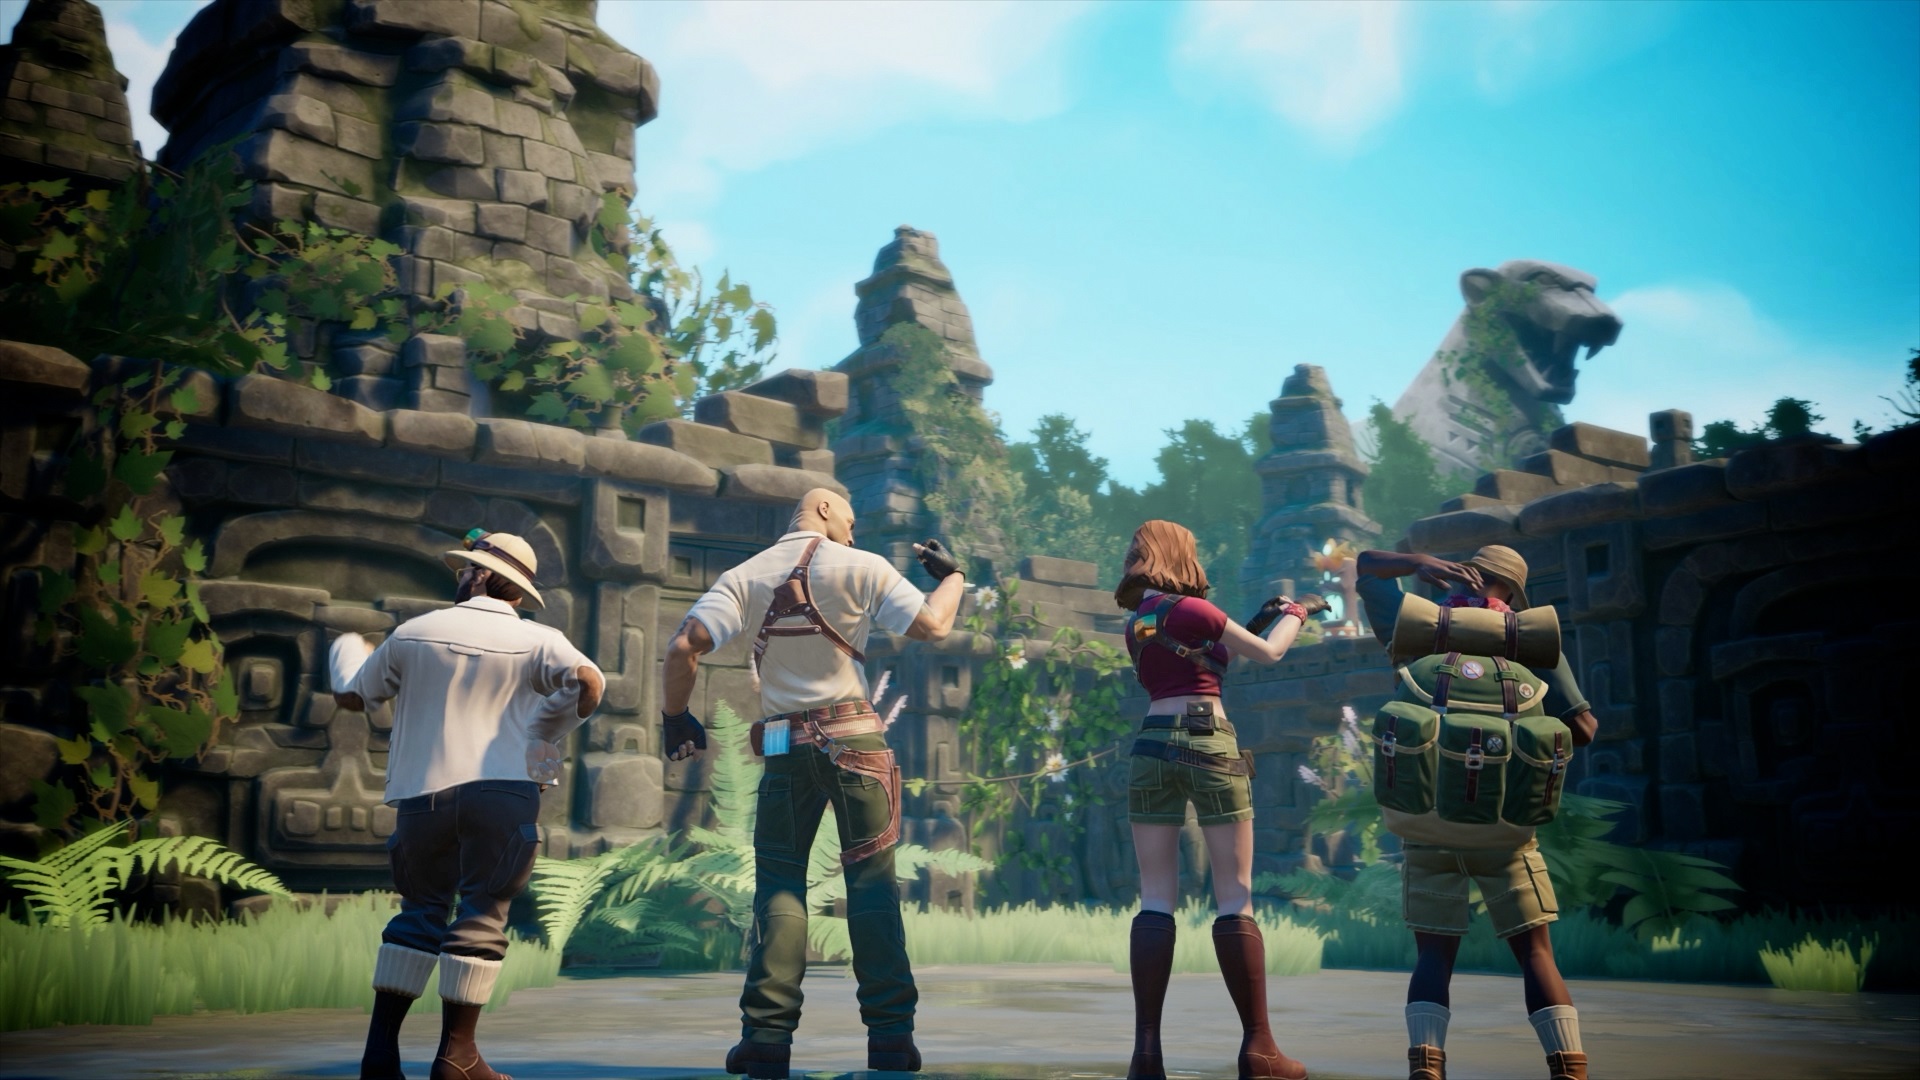 Jumanji: The Video Game Announced for PC and Consoles